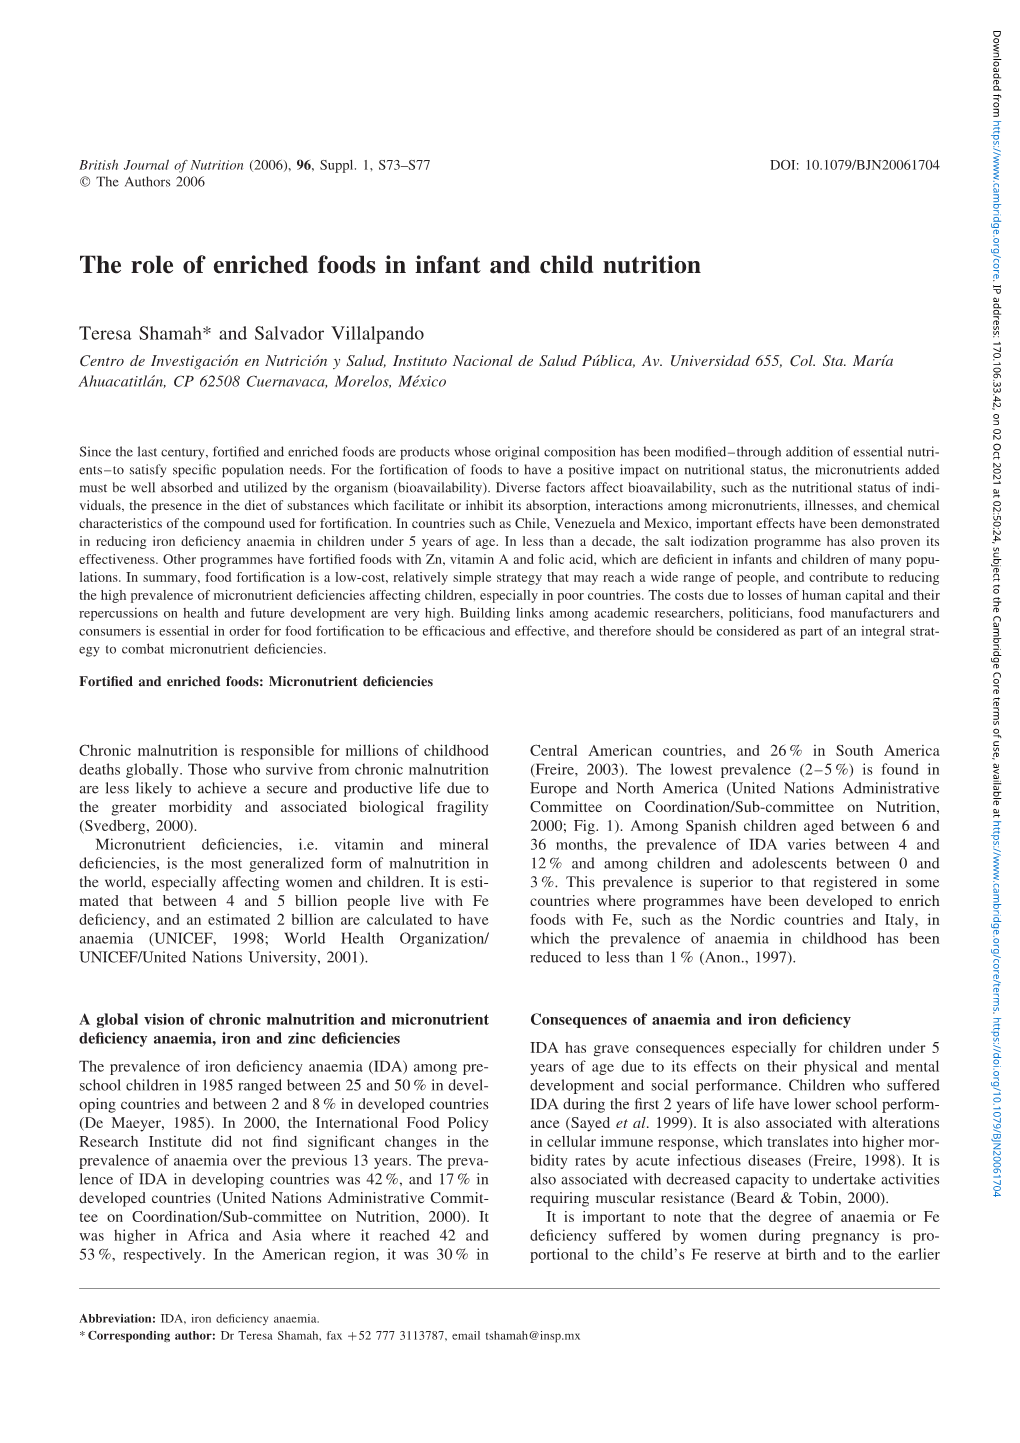 The Role of Enriched Foods in Infant and Child Nutrition